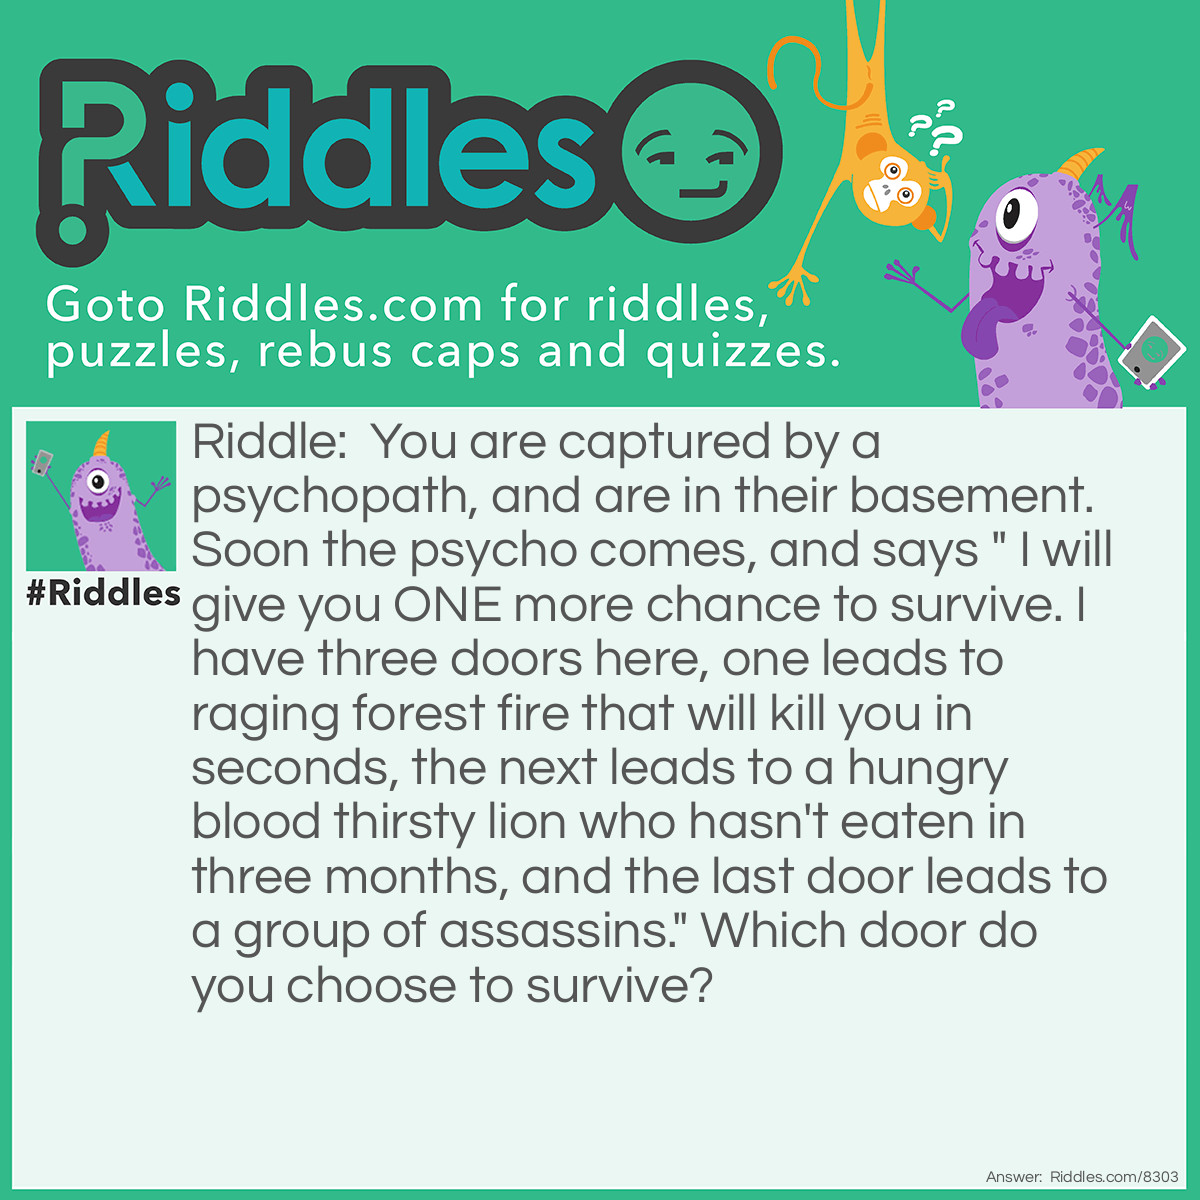 Riddle: You are captured by a psychopath, and are in their basement. Soon the psycho comes, and says " I will give you ONE more chance to survive. I have three doors here, one leads to raging forest fire that will kill you in seconds, the next leads to a hungry blood thirsty lion who hasn't eaten in three months, and the last door leads to a group of assassins." Which door do you choose to survive? Answer: You choose the second door. That lion is LONG GONE!!!!!!!!